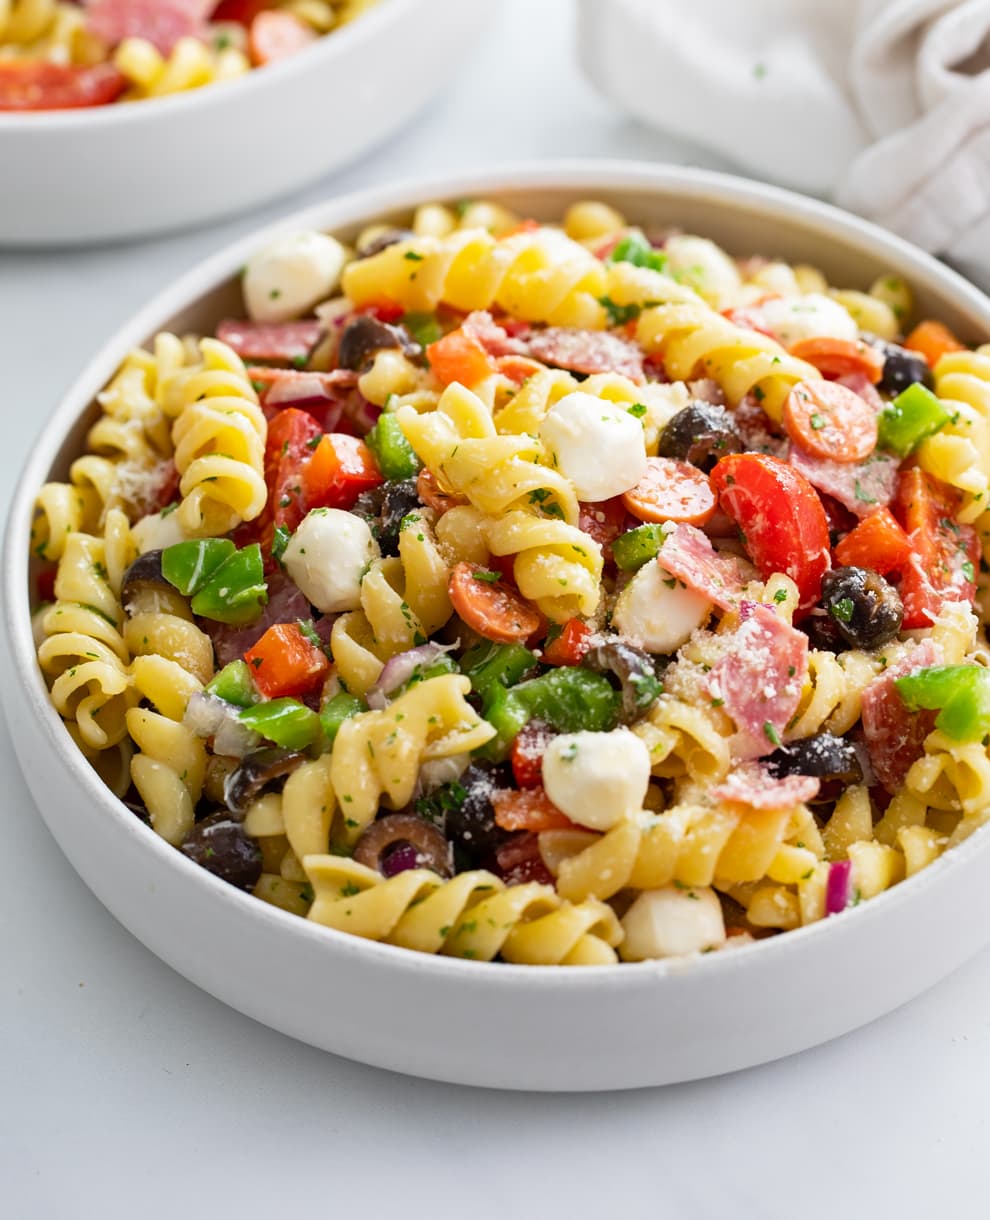 A white bowl filled with Italian Pasta Salad with meats, cheese, and vegetables.